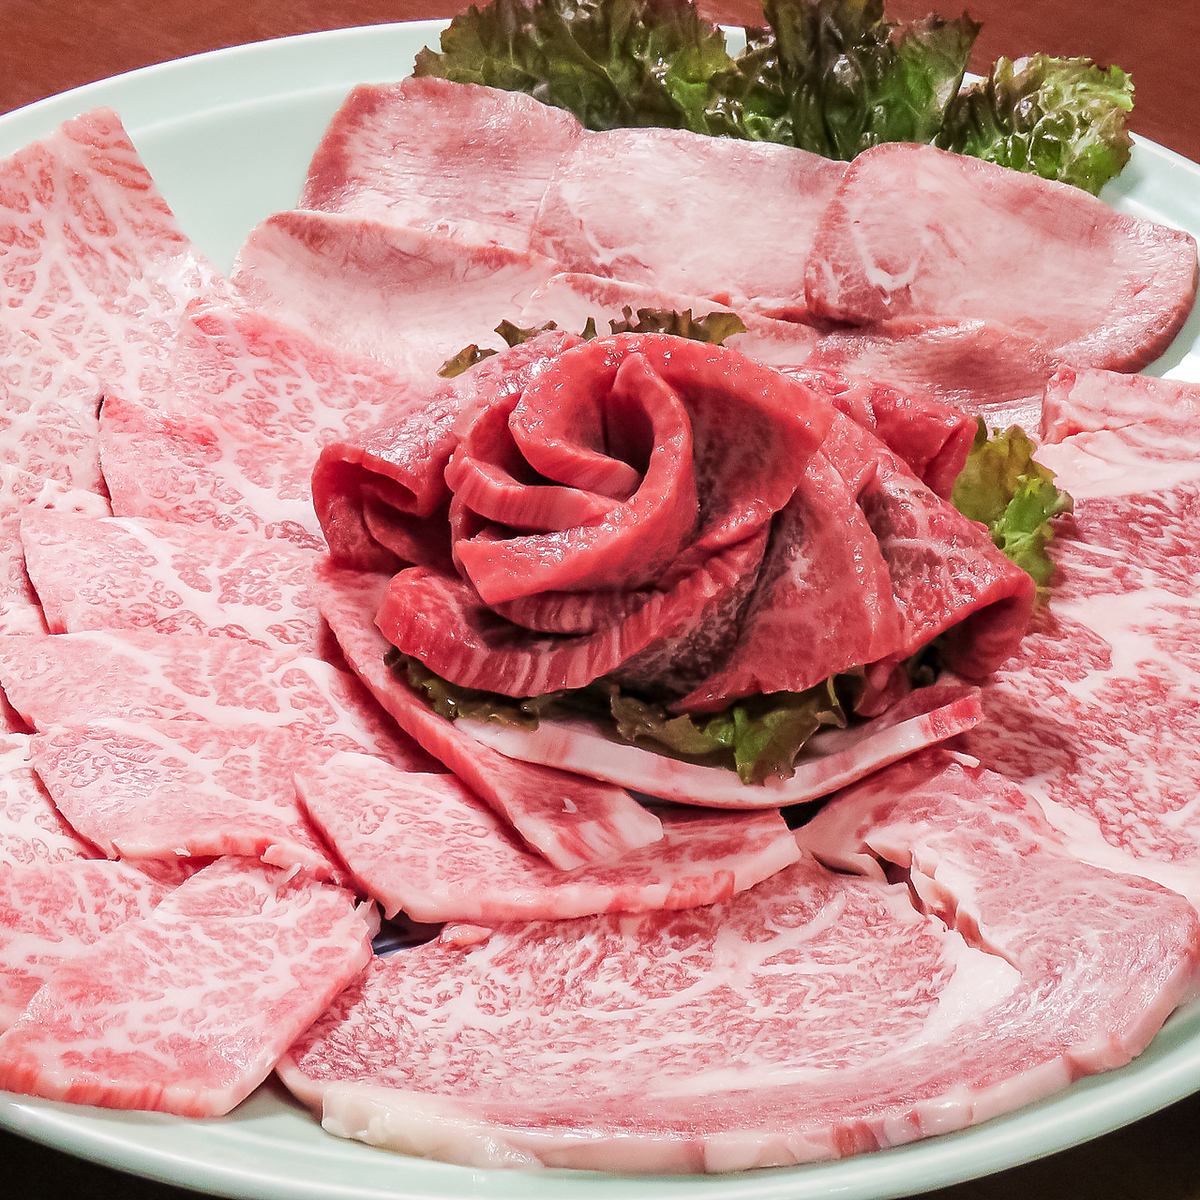 Please enjoy the carefully selected Japanese black beef.Delicious meat on a special day